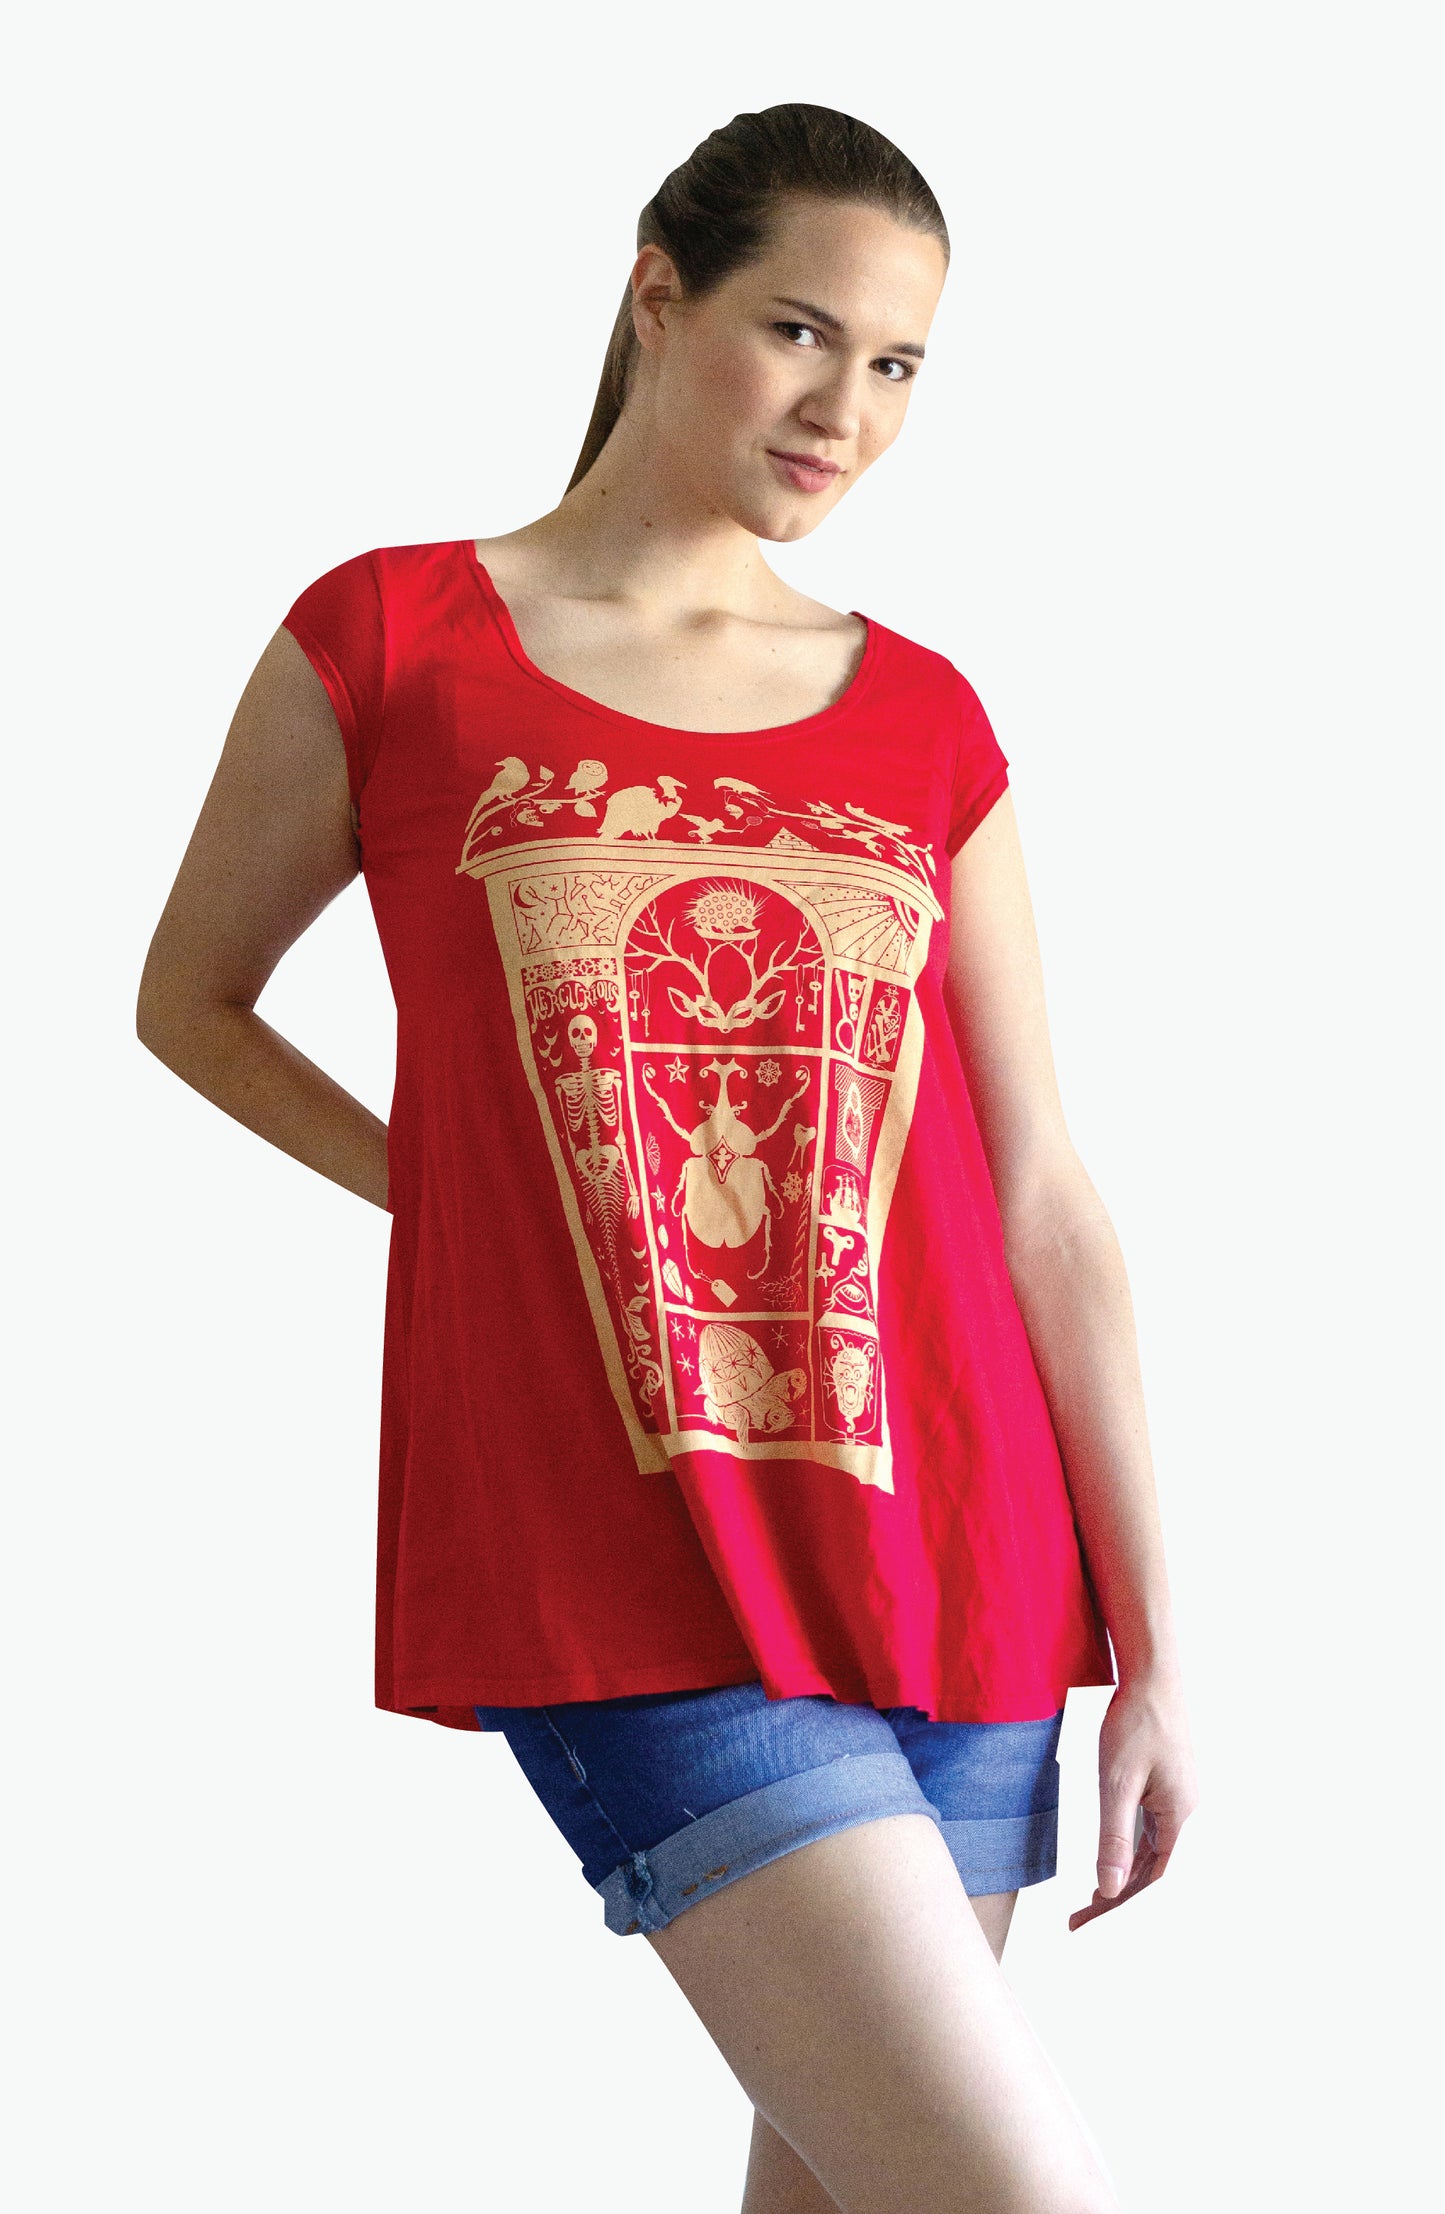 Red scoop neck cap-sleeved trapeze top with white cabinet of curiosities print on model 